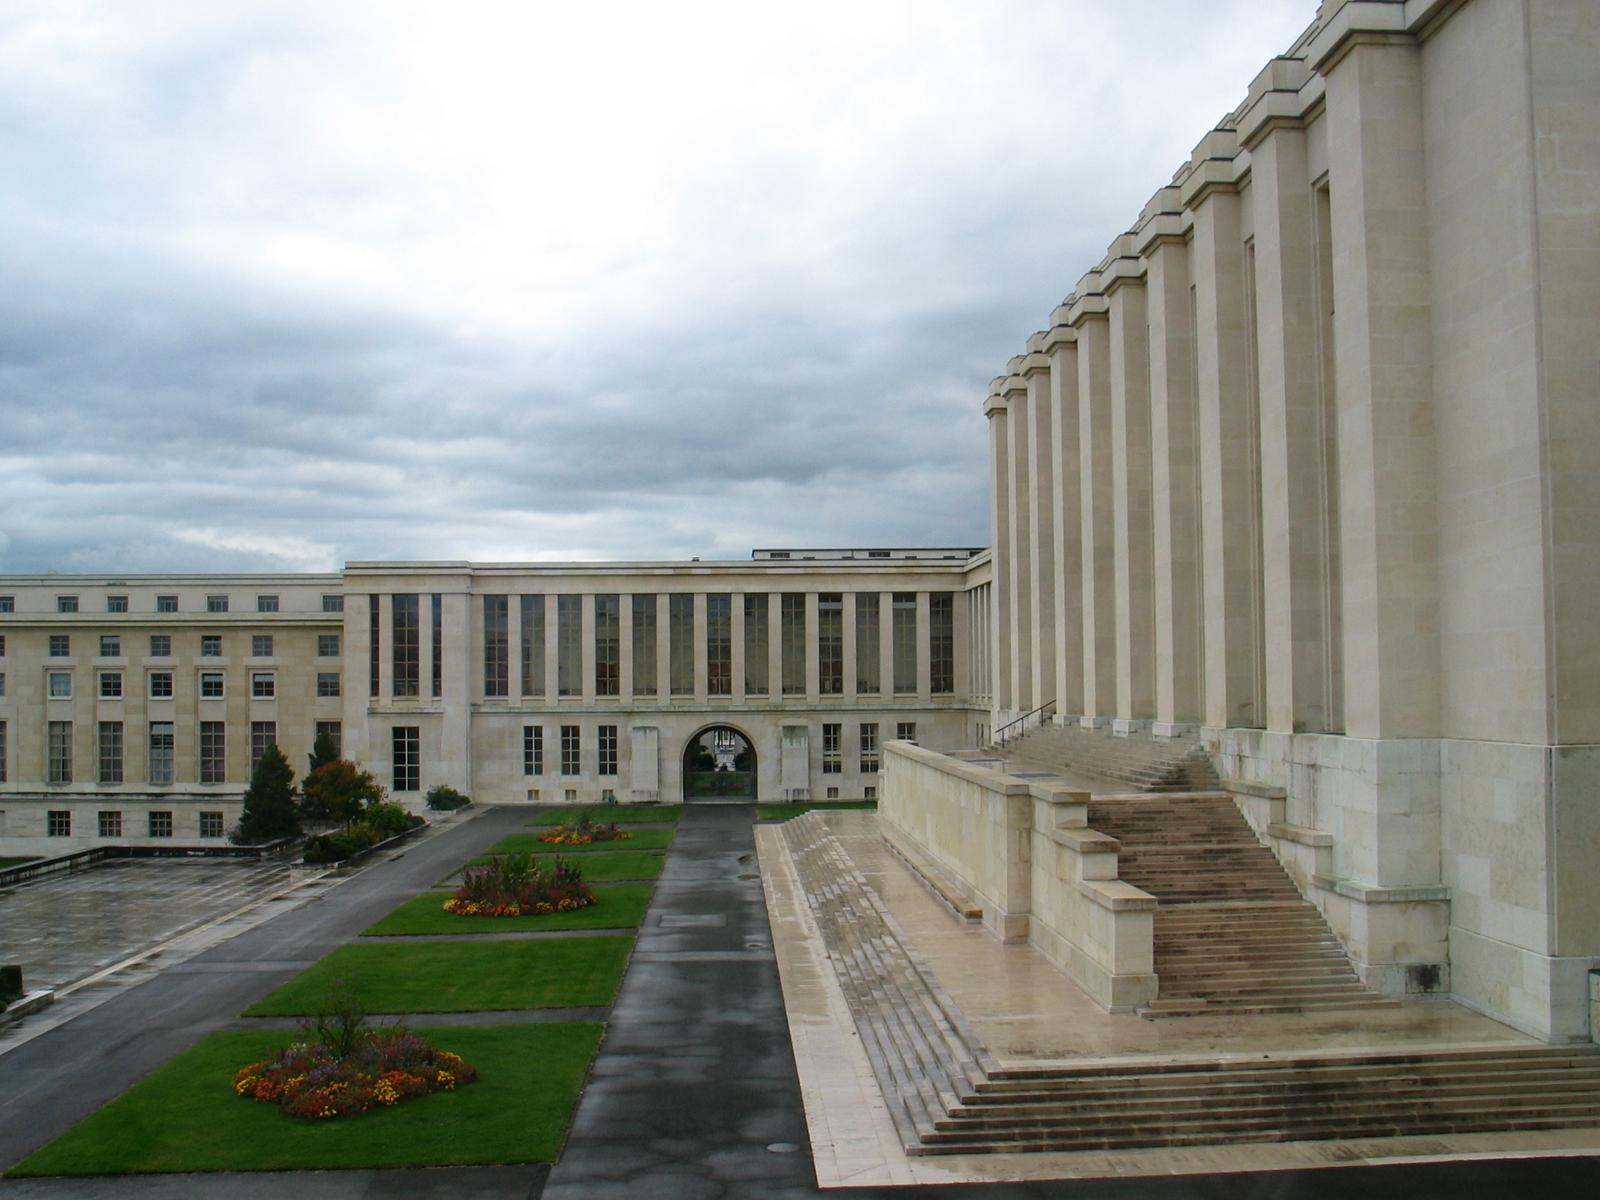 The back entrance to the old League of Nations building